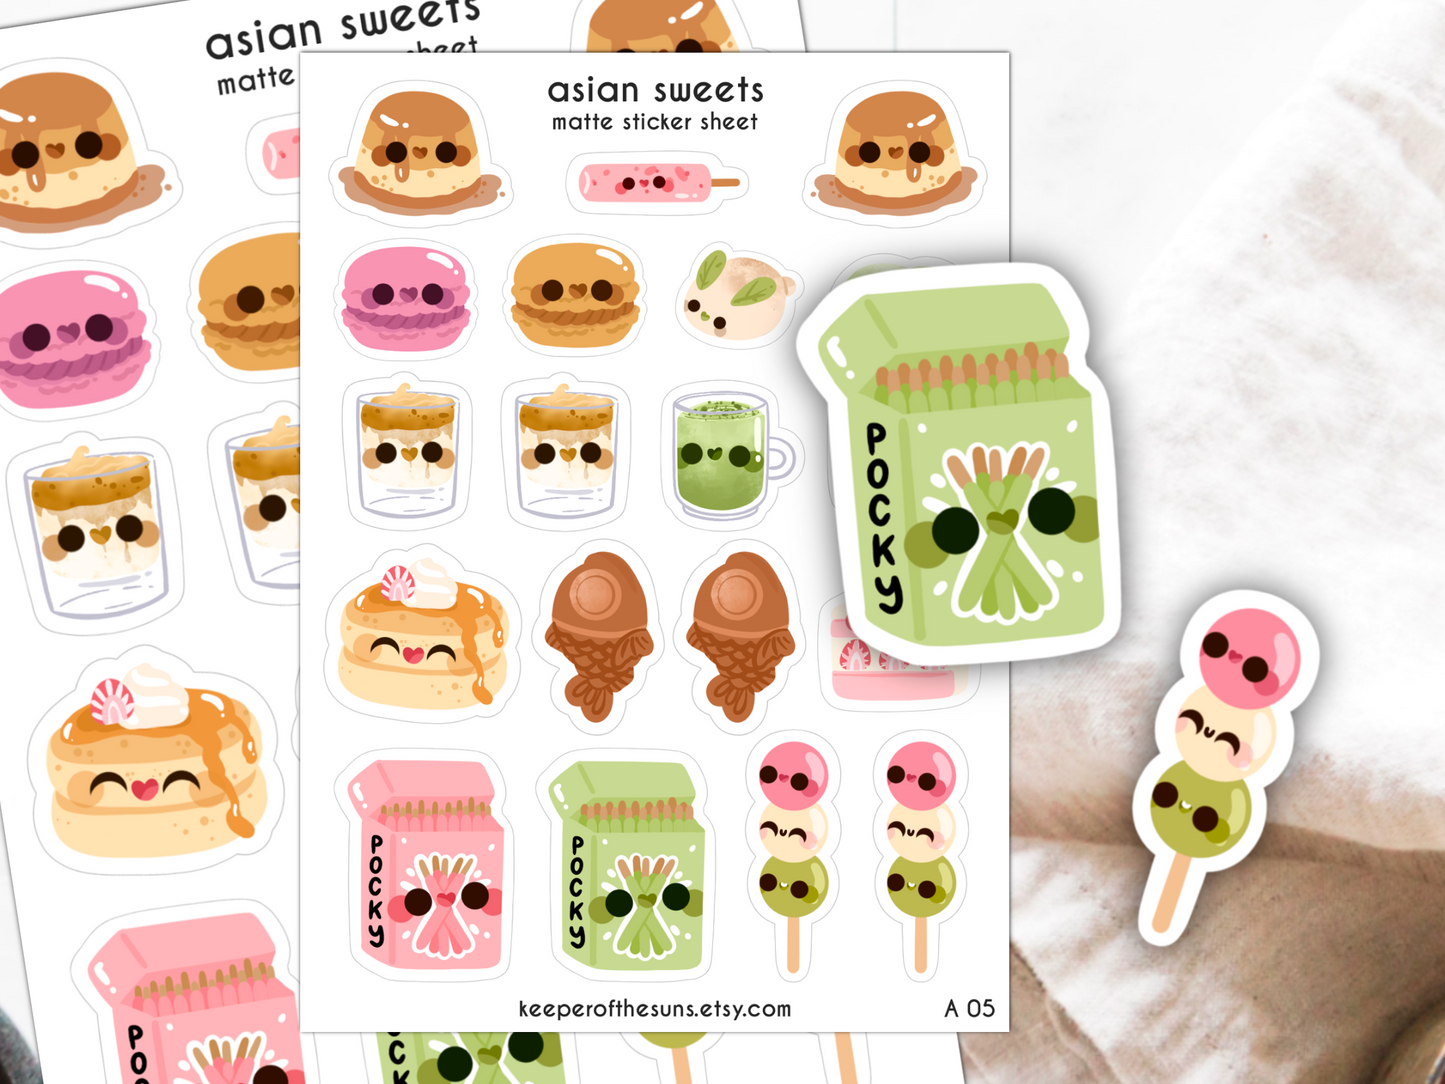 Asian Sweets Sticker Sheet | Small Planner Stickers